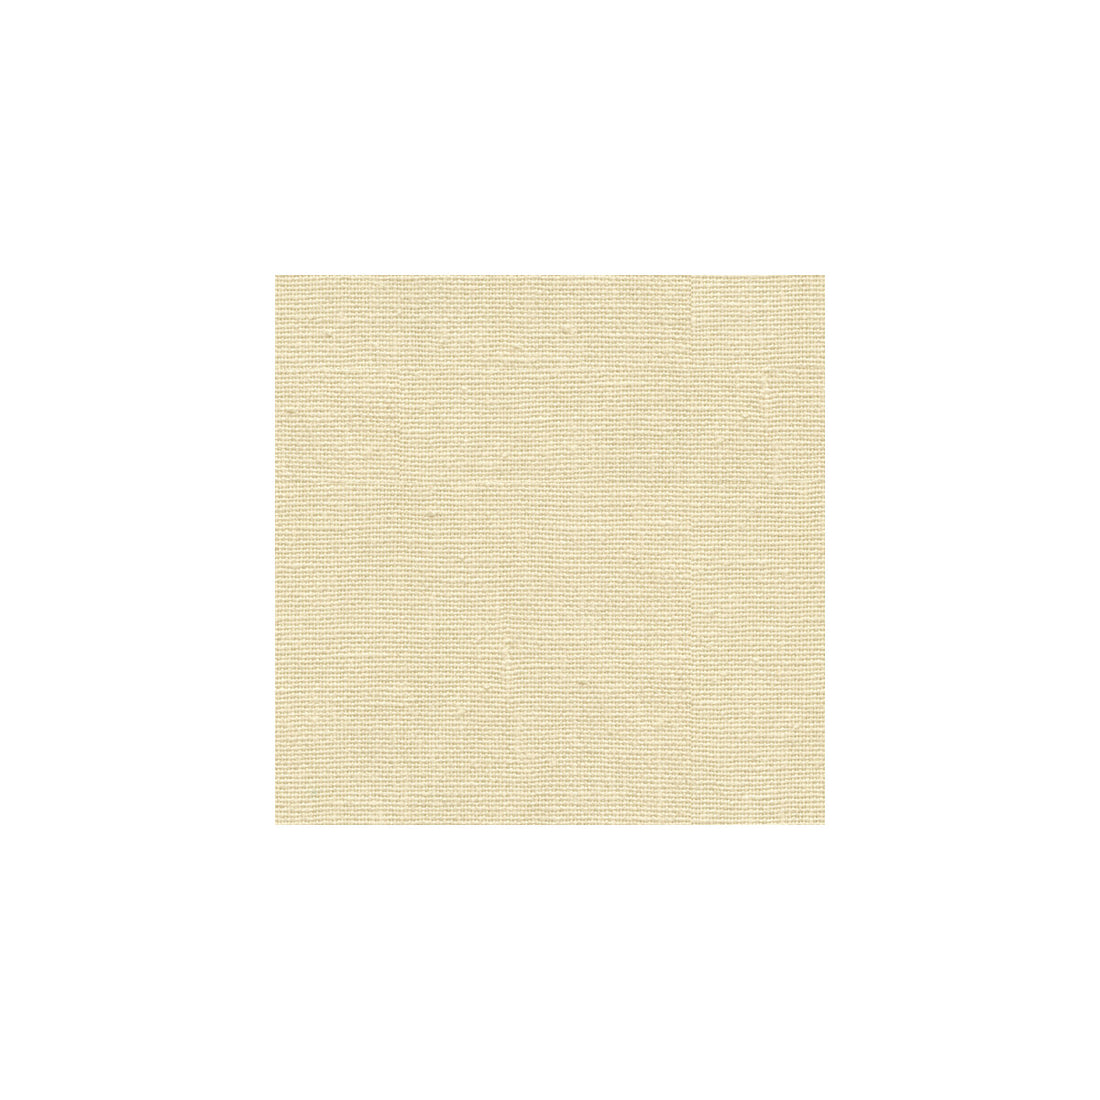 Sunnycrest fabric in cream color - pattern 32820.16.0 - by Kravet Basics in the Thom Filicia collection